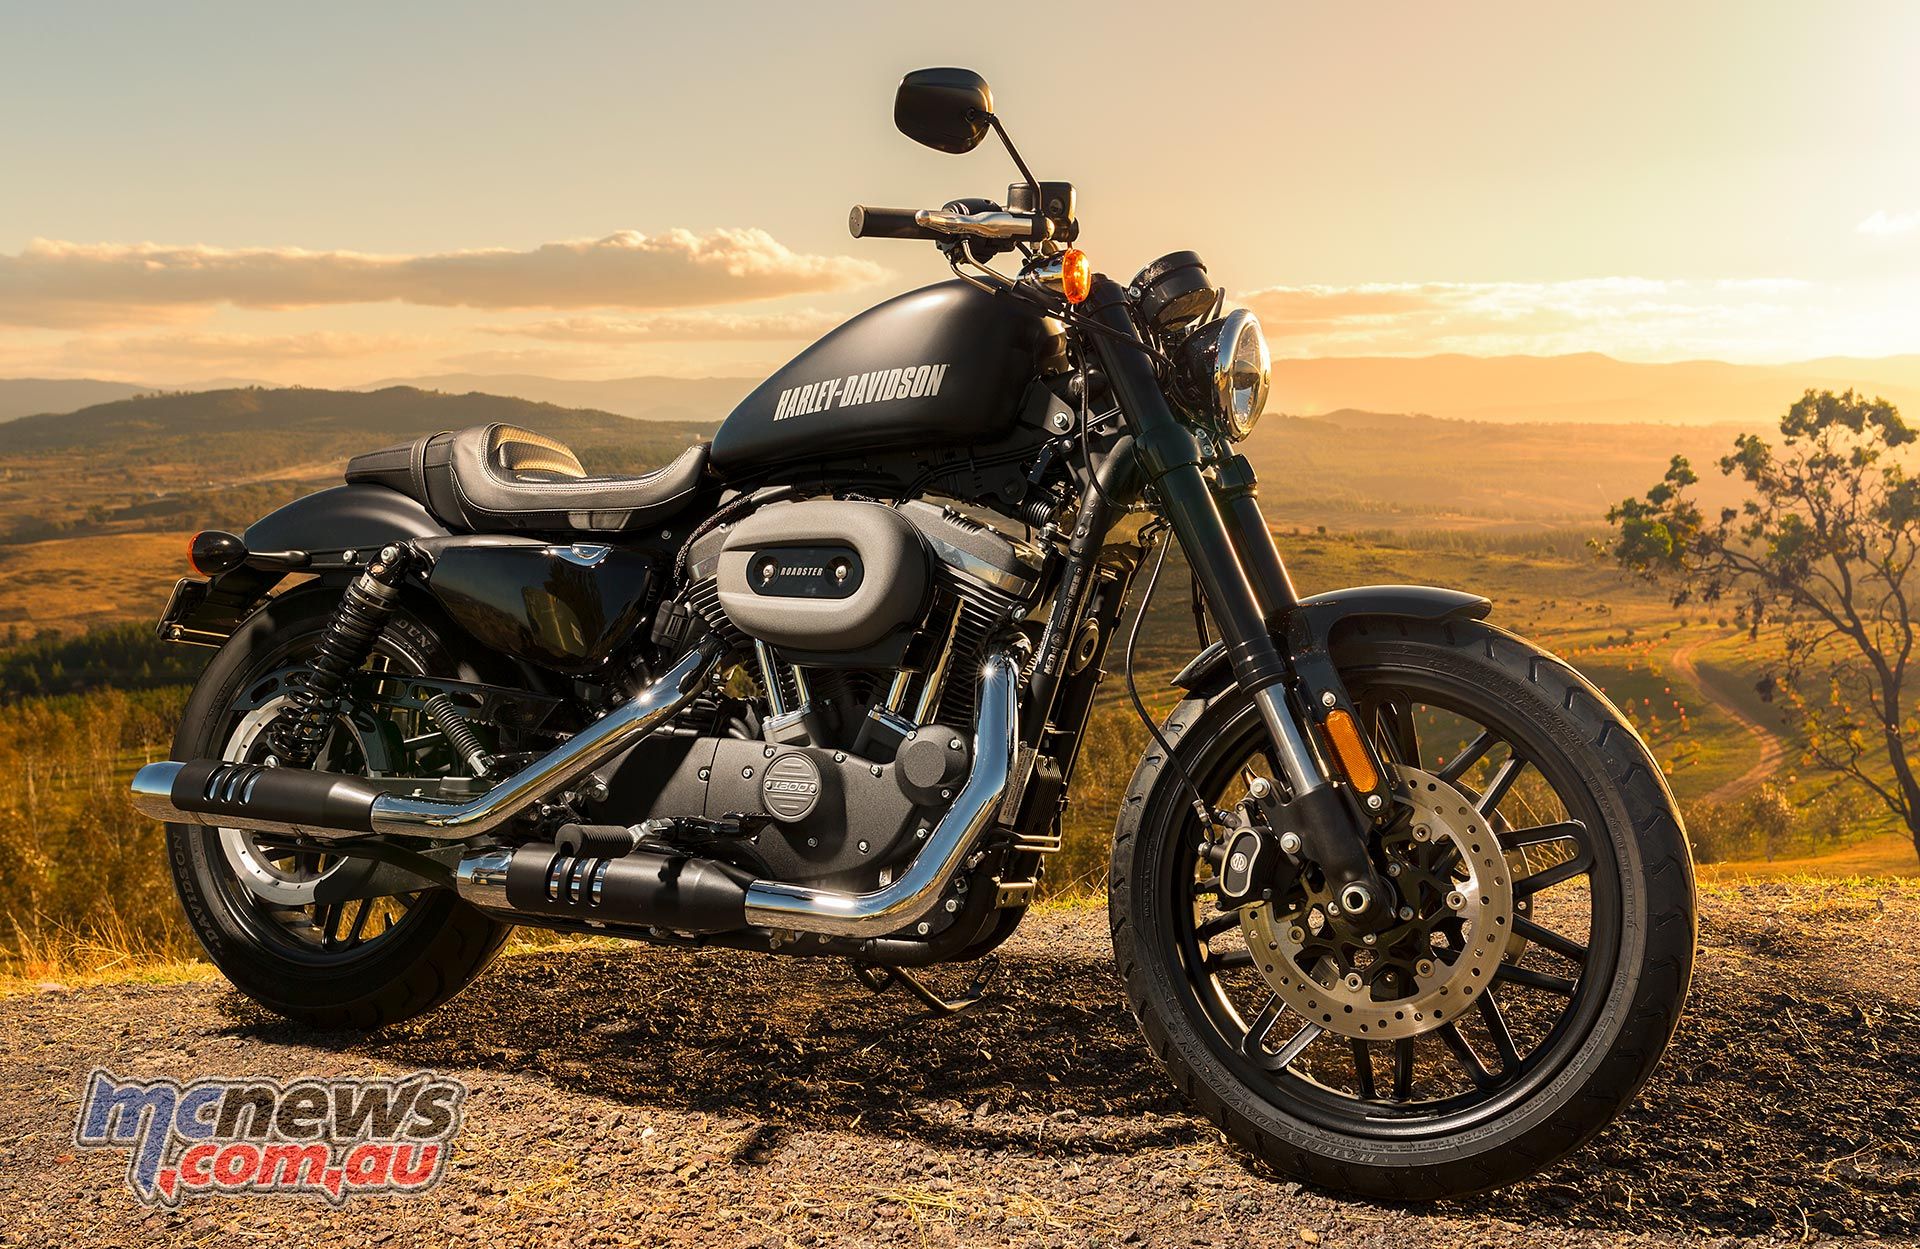 Harley Davidson Roadster Review. MCNews.com.au. Motorcycle News